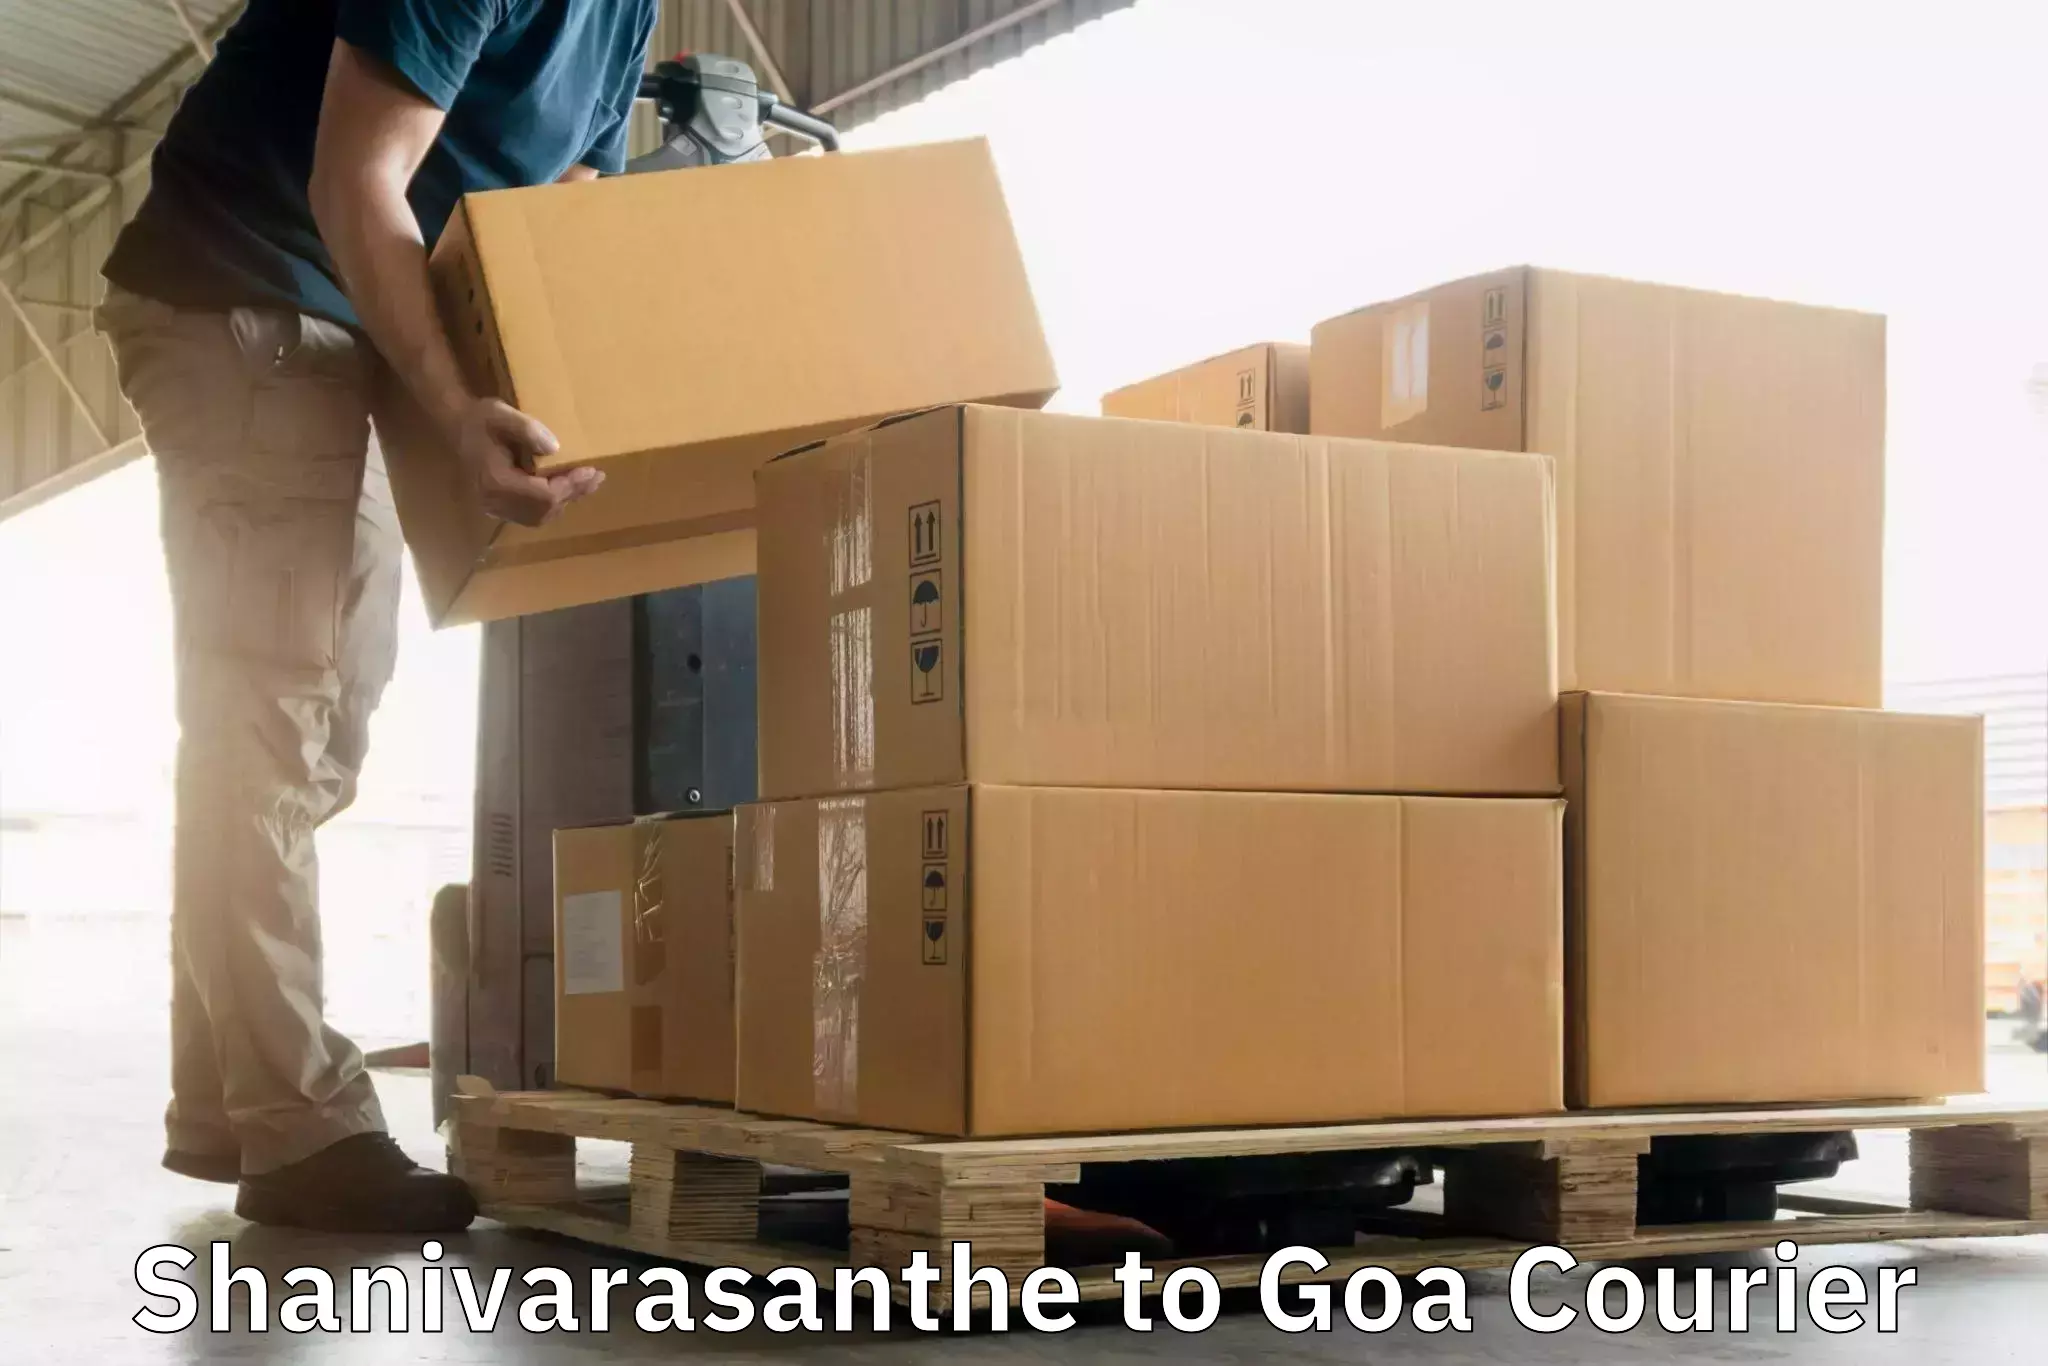 End-to-end delivery Shanivarasanthe to Vasco da Gama